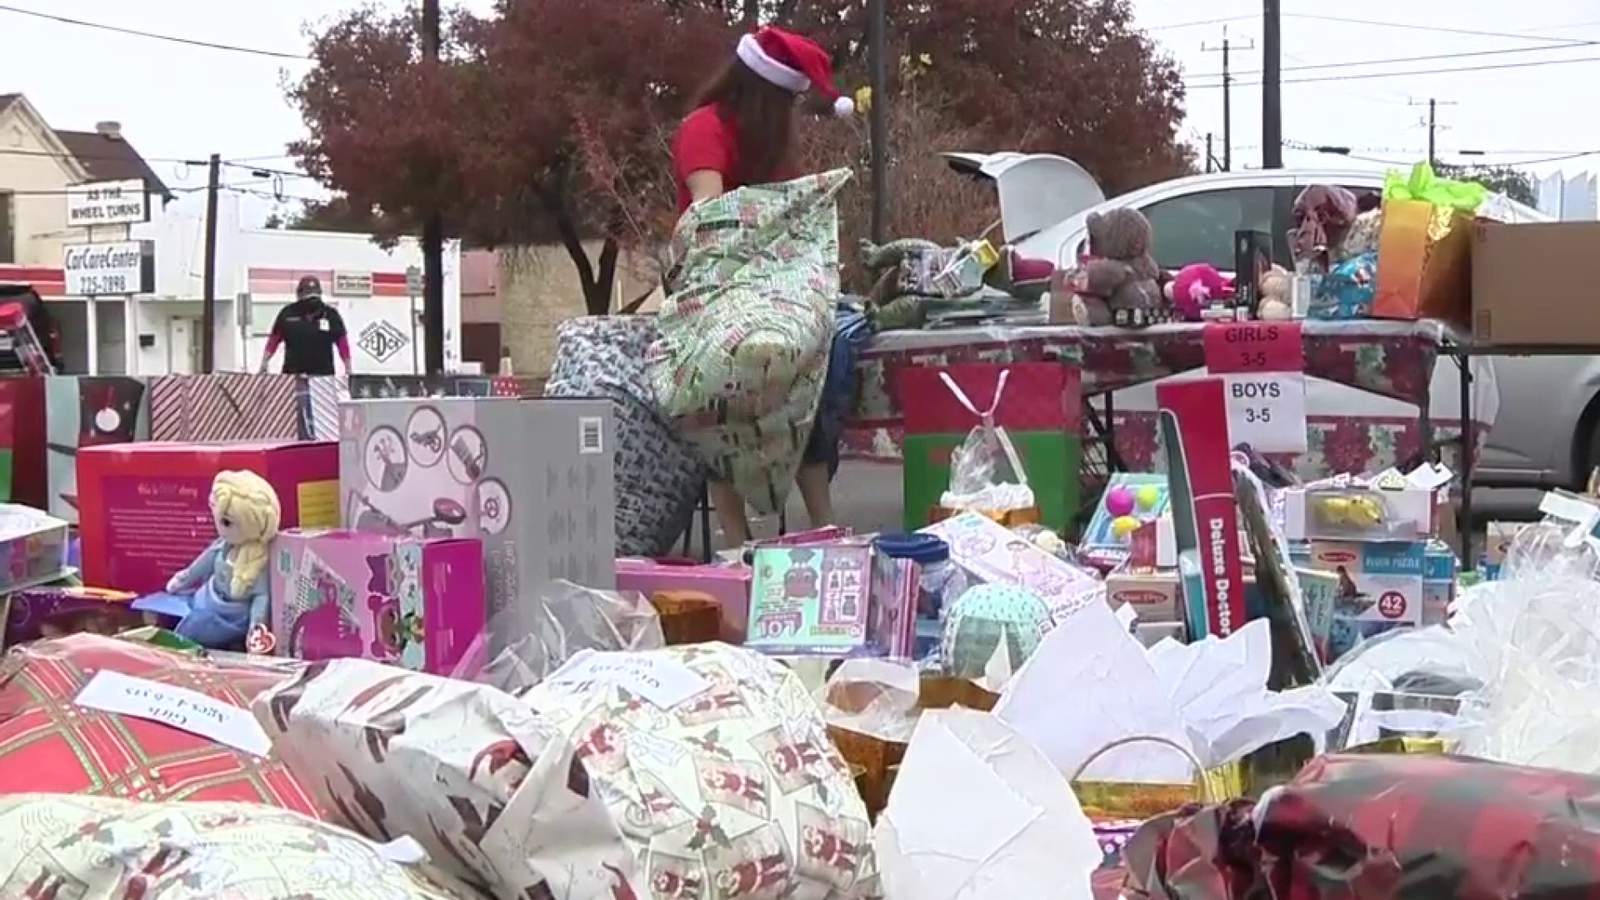 Flood of donations after toy theft means 1,600 underprivileged San Antonio kids get toys instead of 60